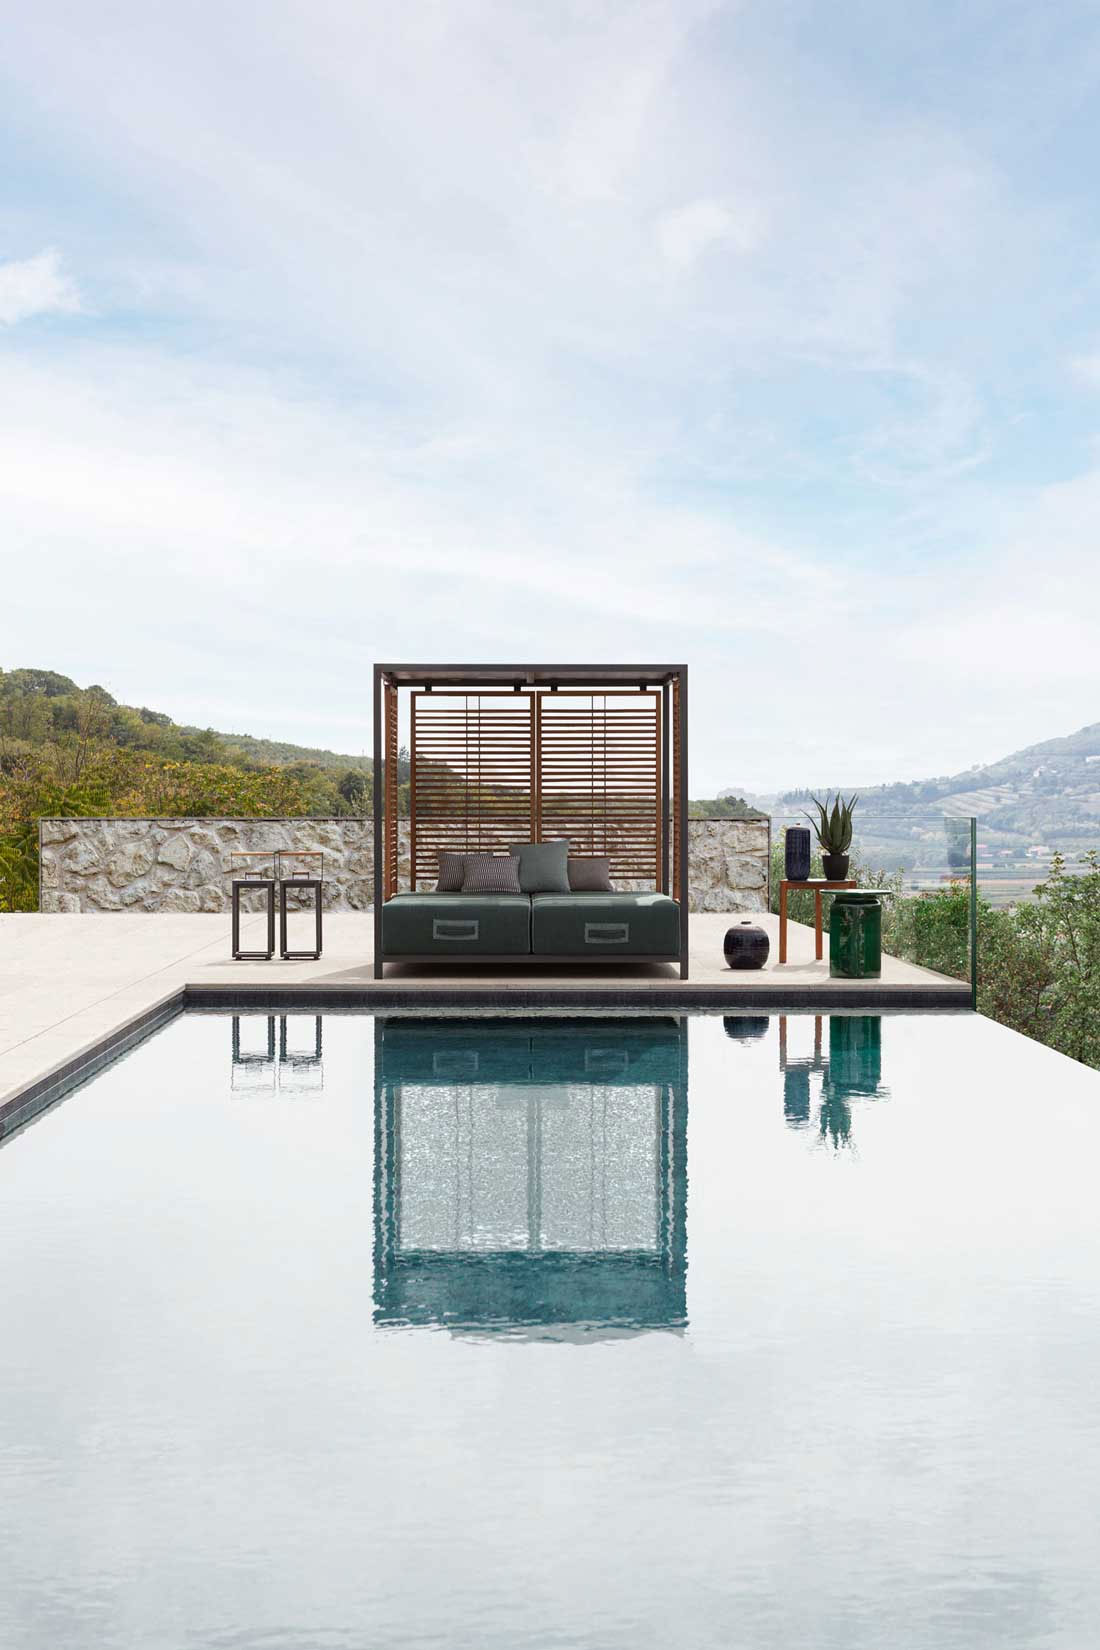 Alcova is an intimate and exclusive outdoor daybed that looks like a large luxurious canopy bed with 2 independent reclining mattresses. Free home delivery.